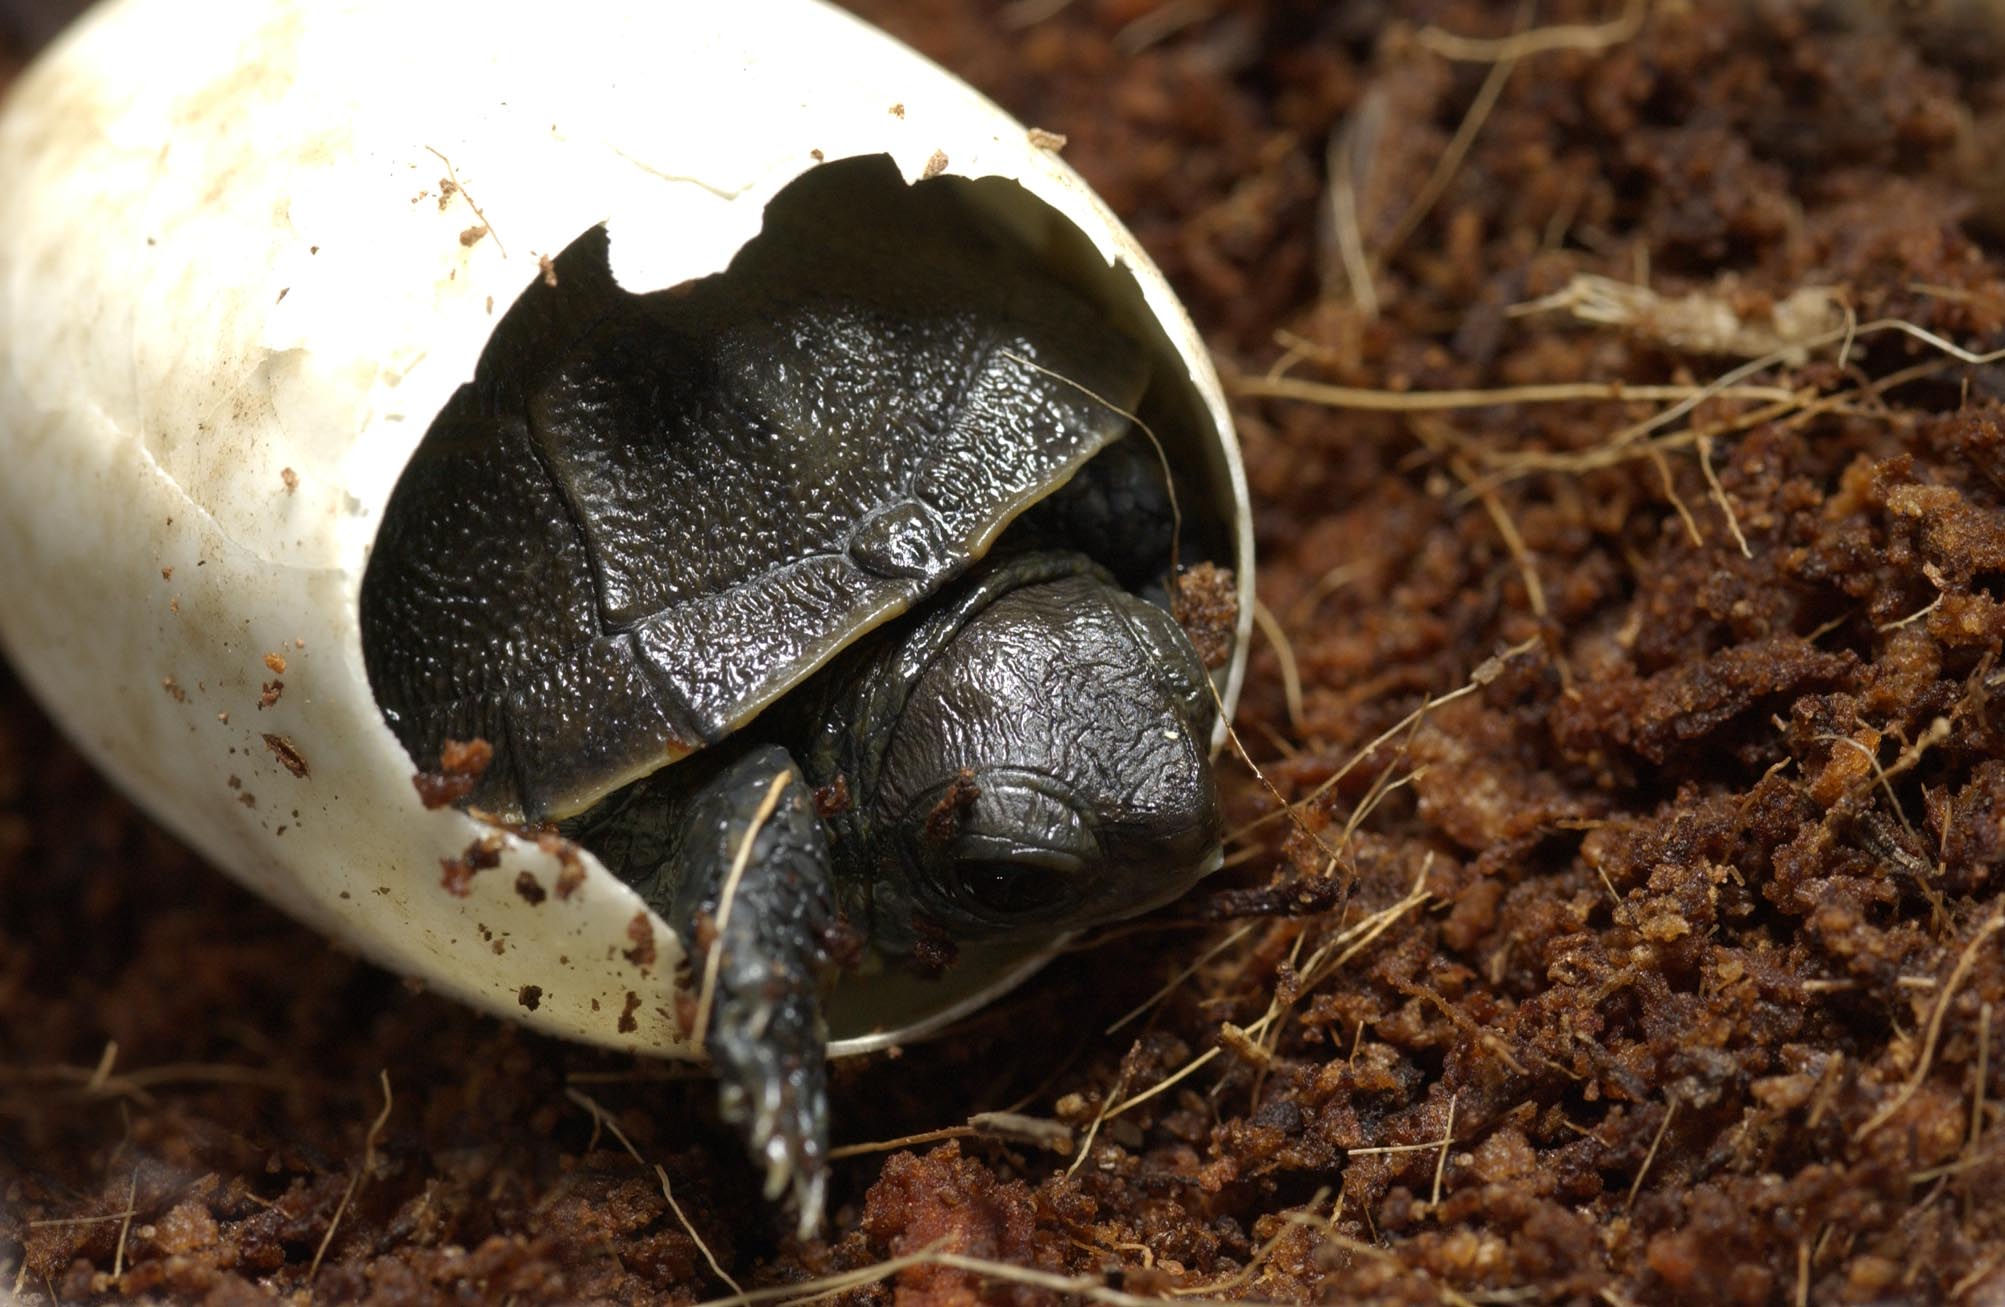 Baby turtles! Houston Zoo has first ever hatching of highly